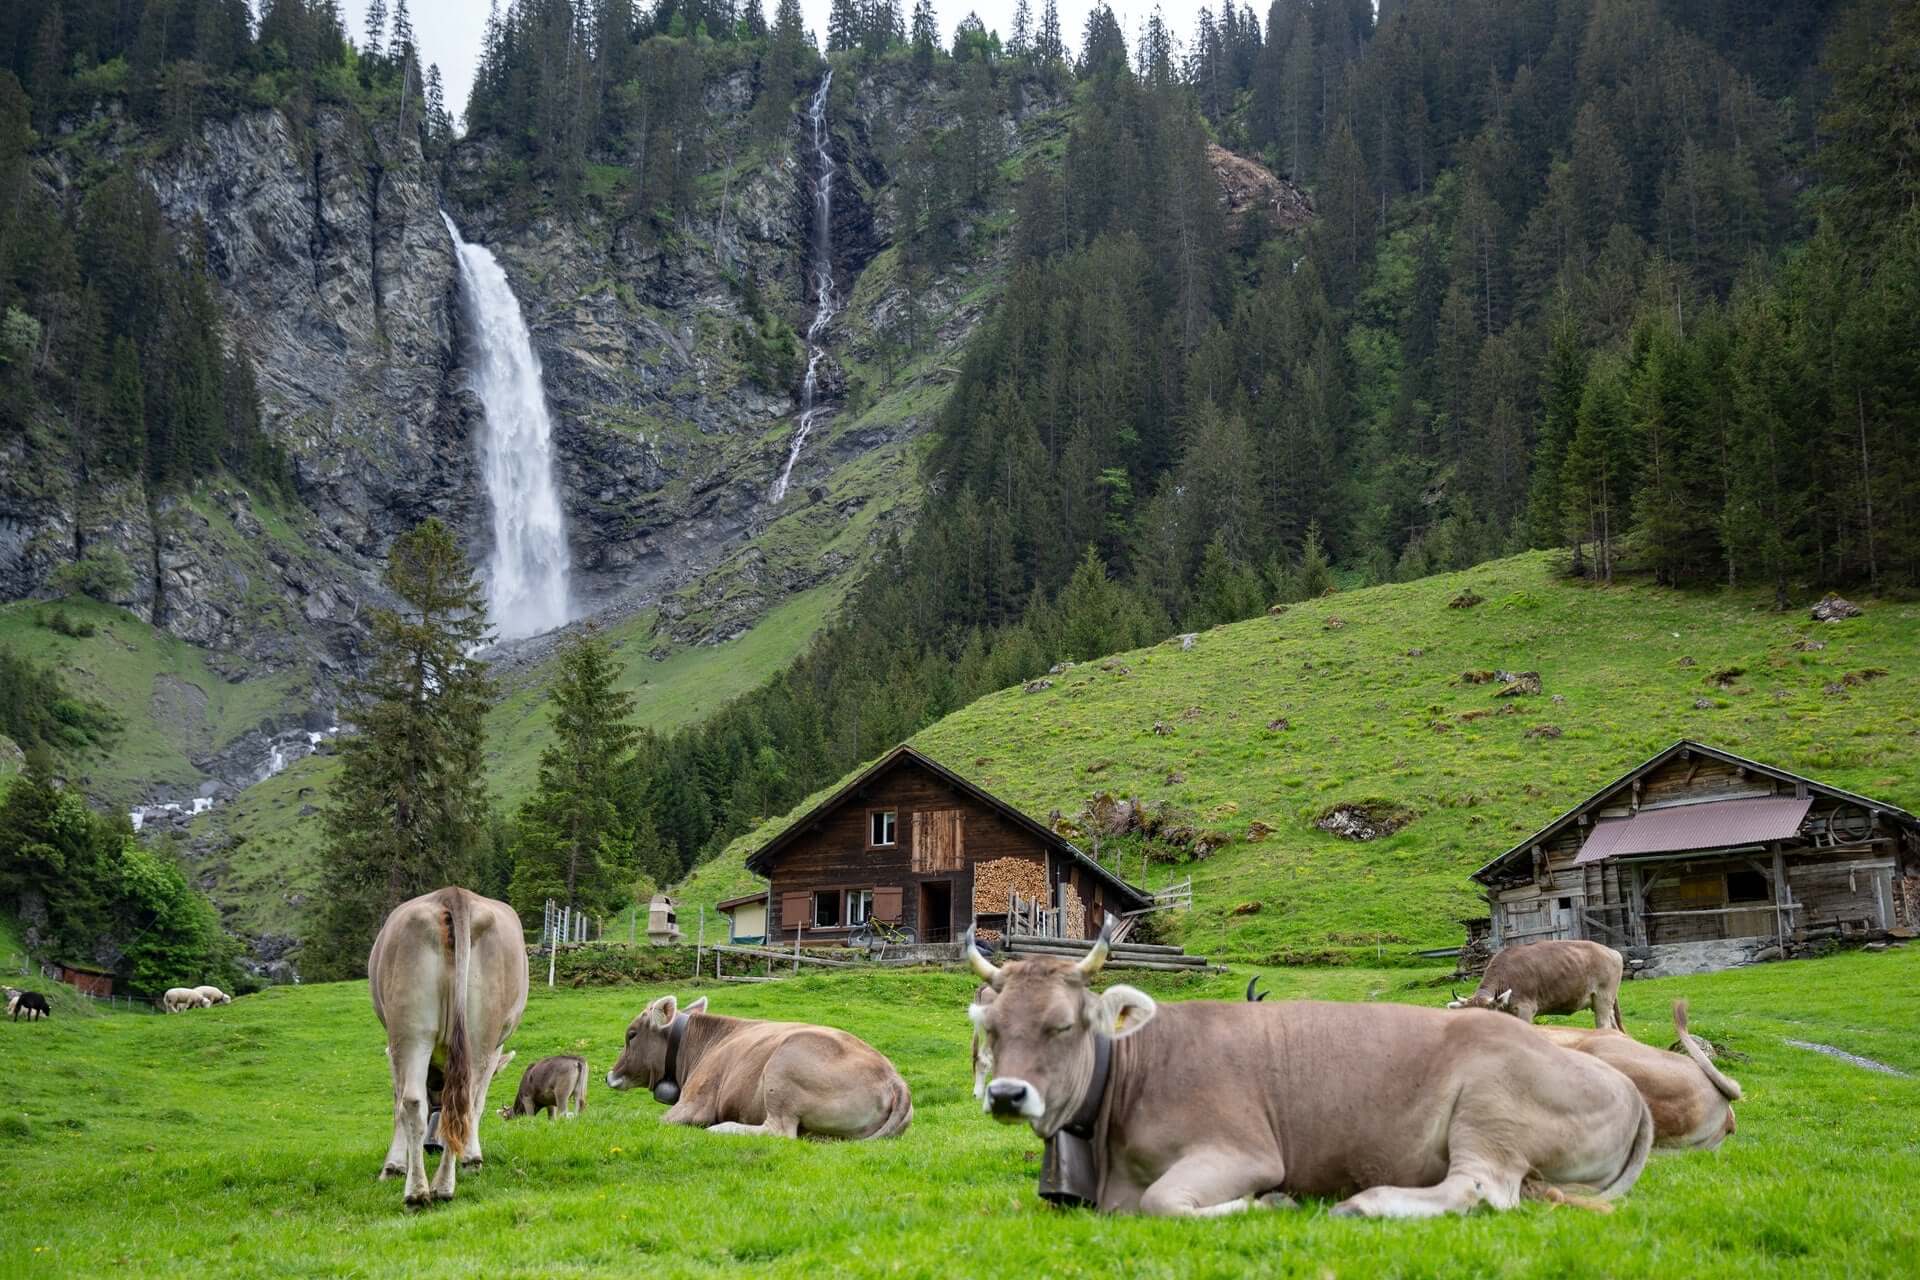 A herd of brown cows relaxes in a green pasture in front of a waterfall.